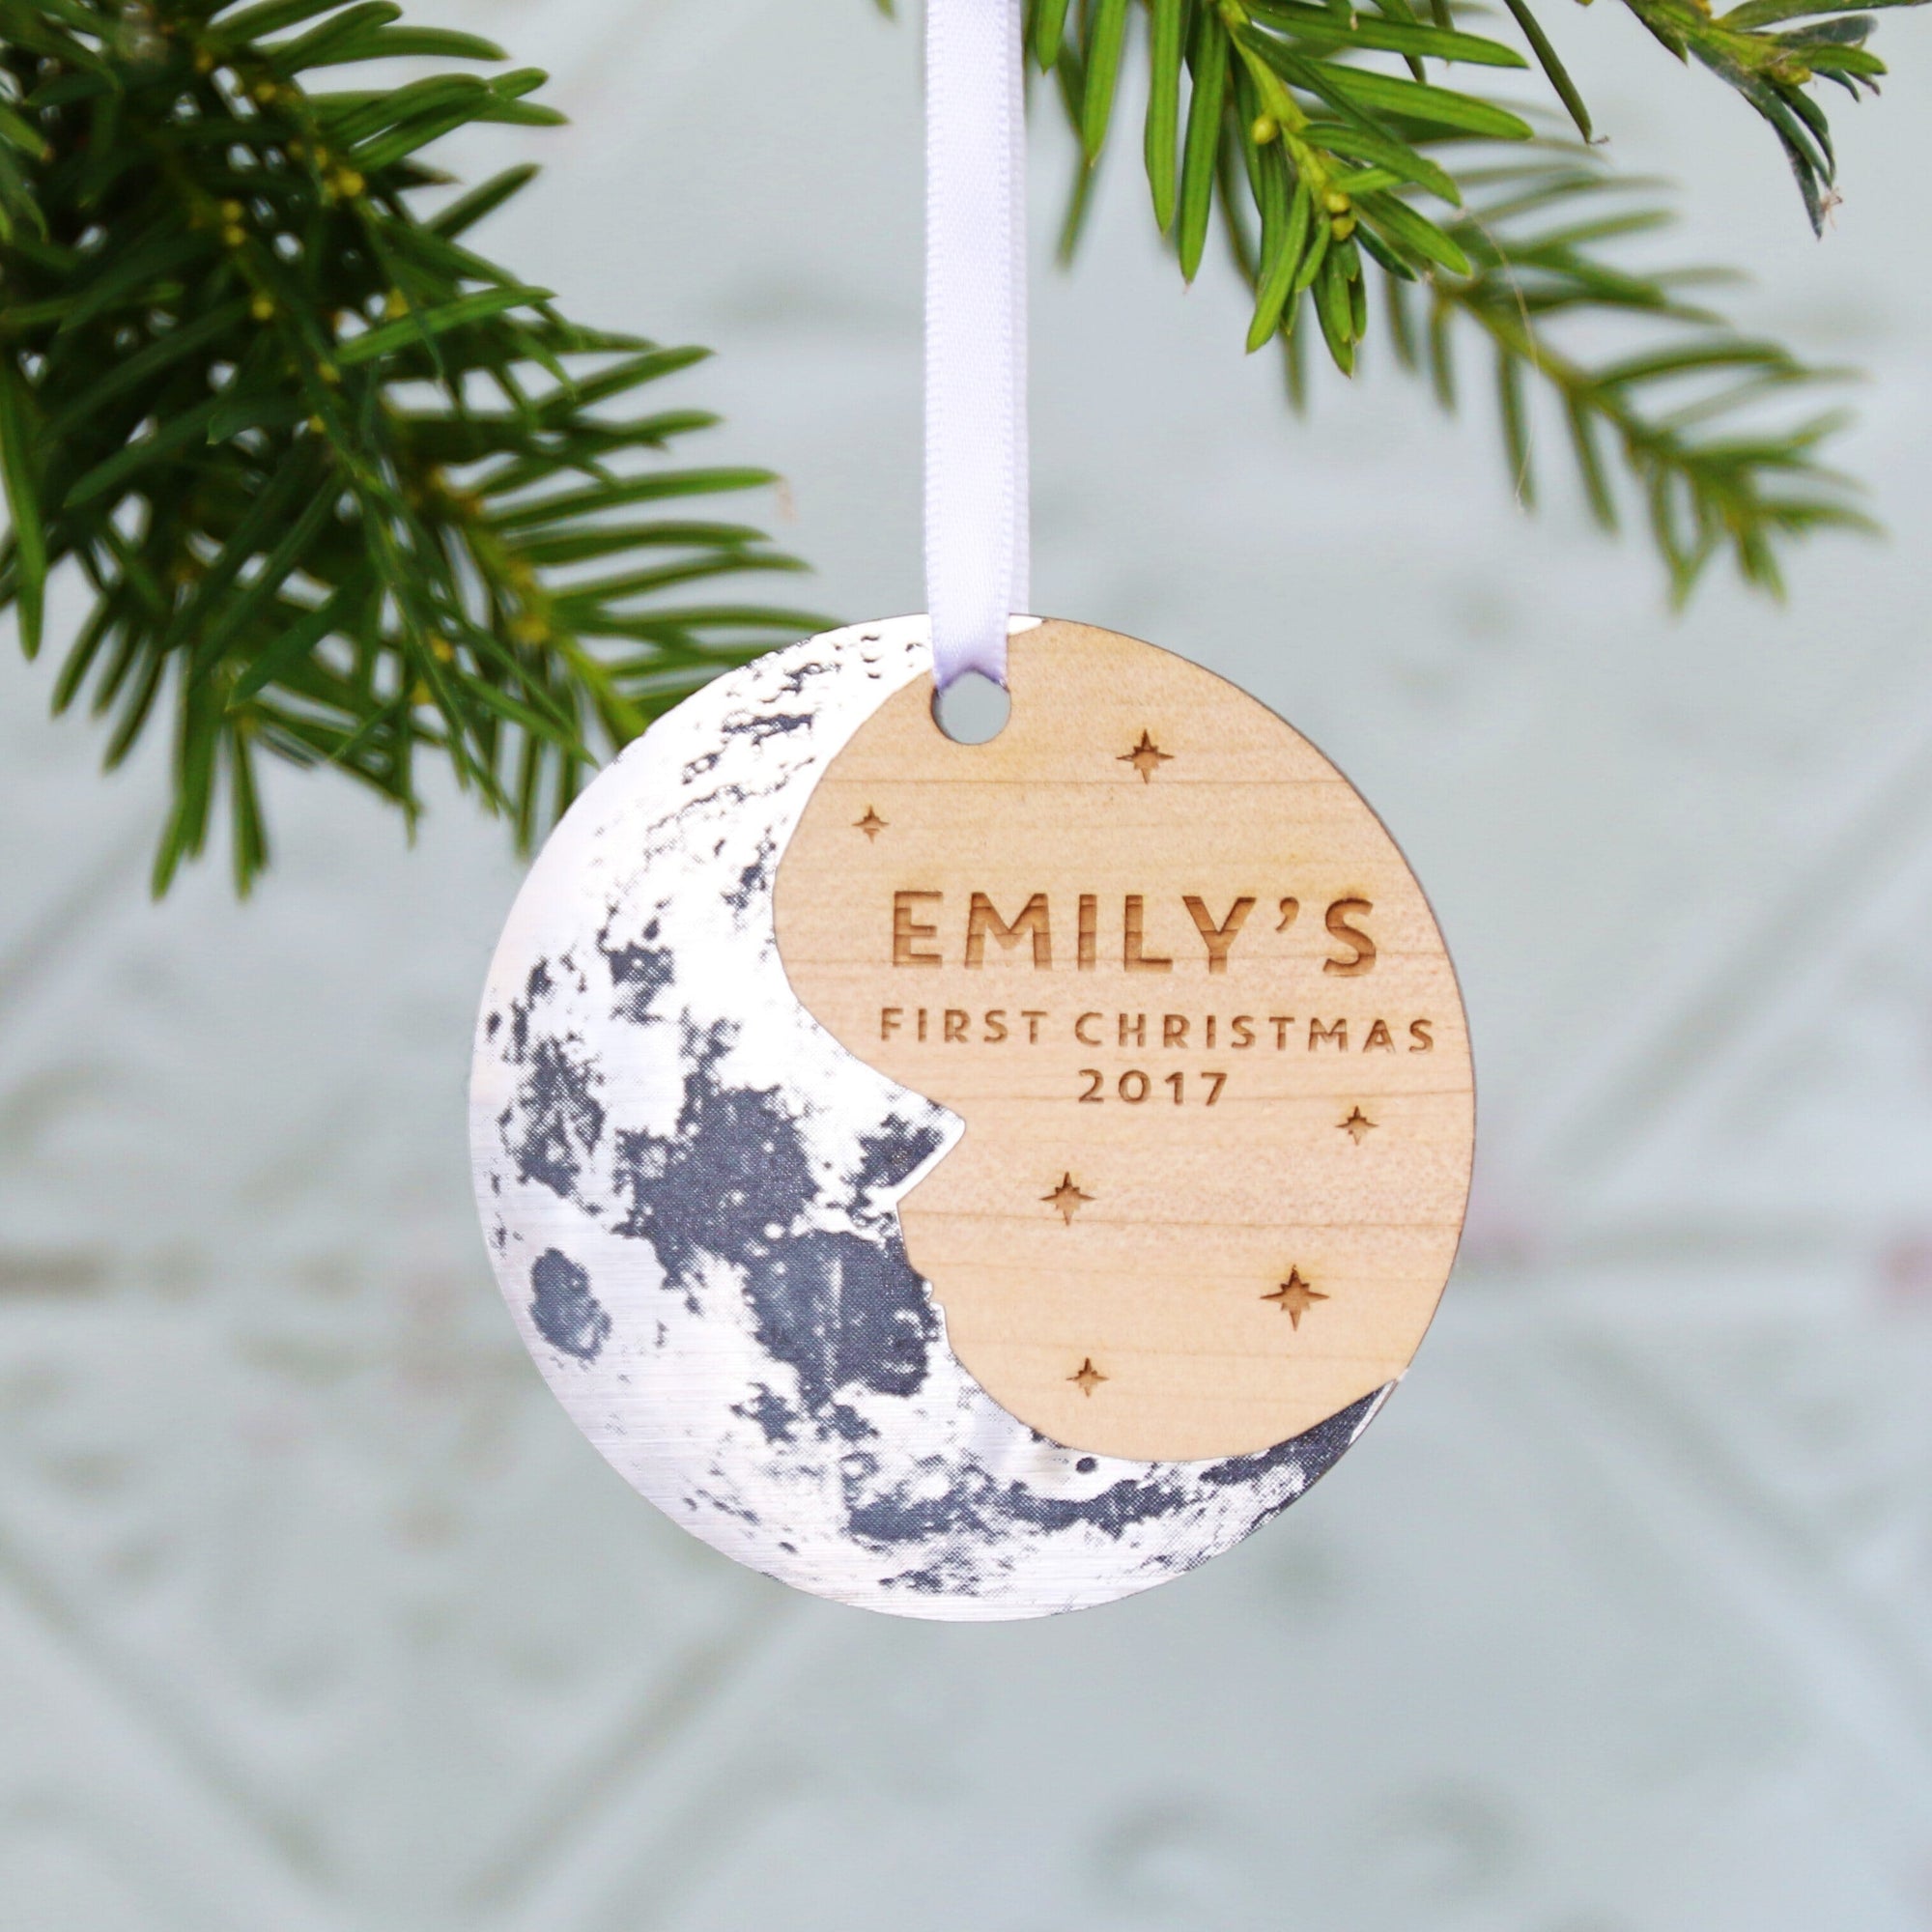 A Great Selection of Baby's First Christmas Ornaments to Decorate Your Tree